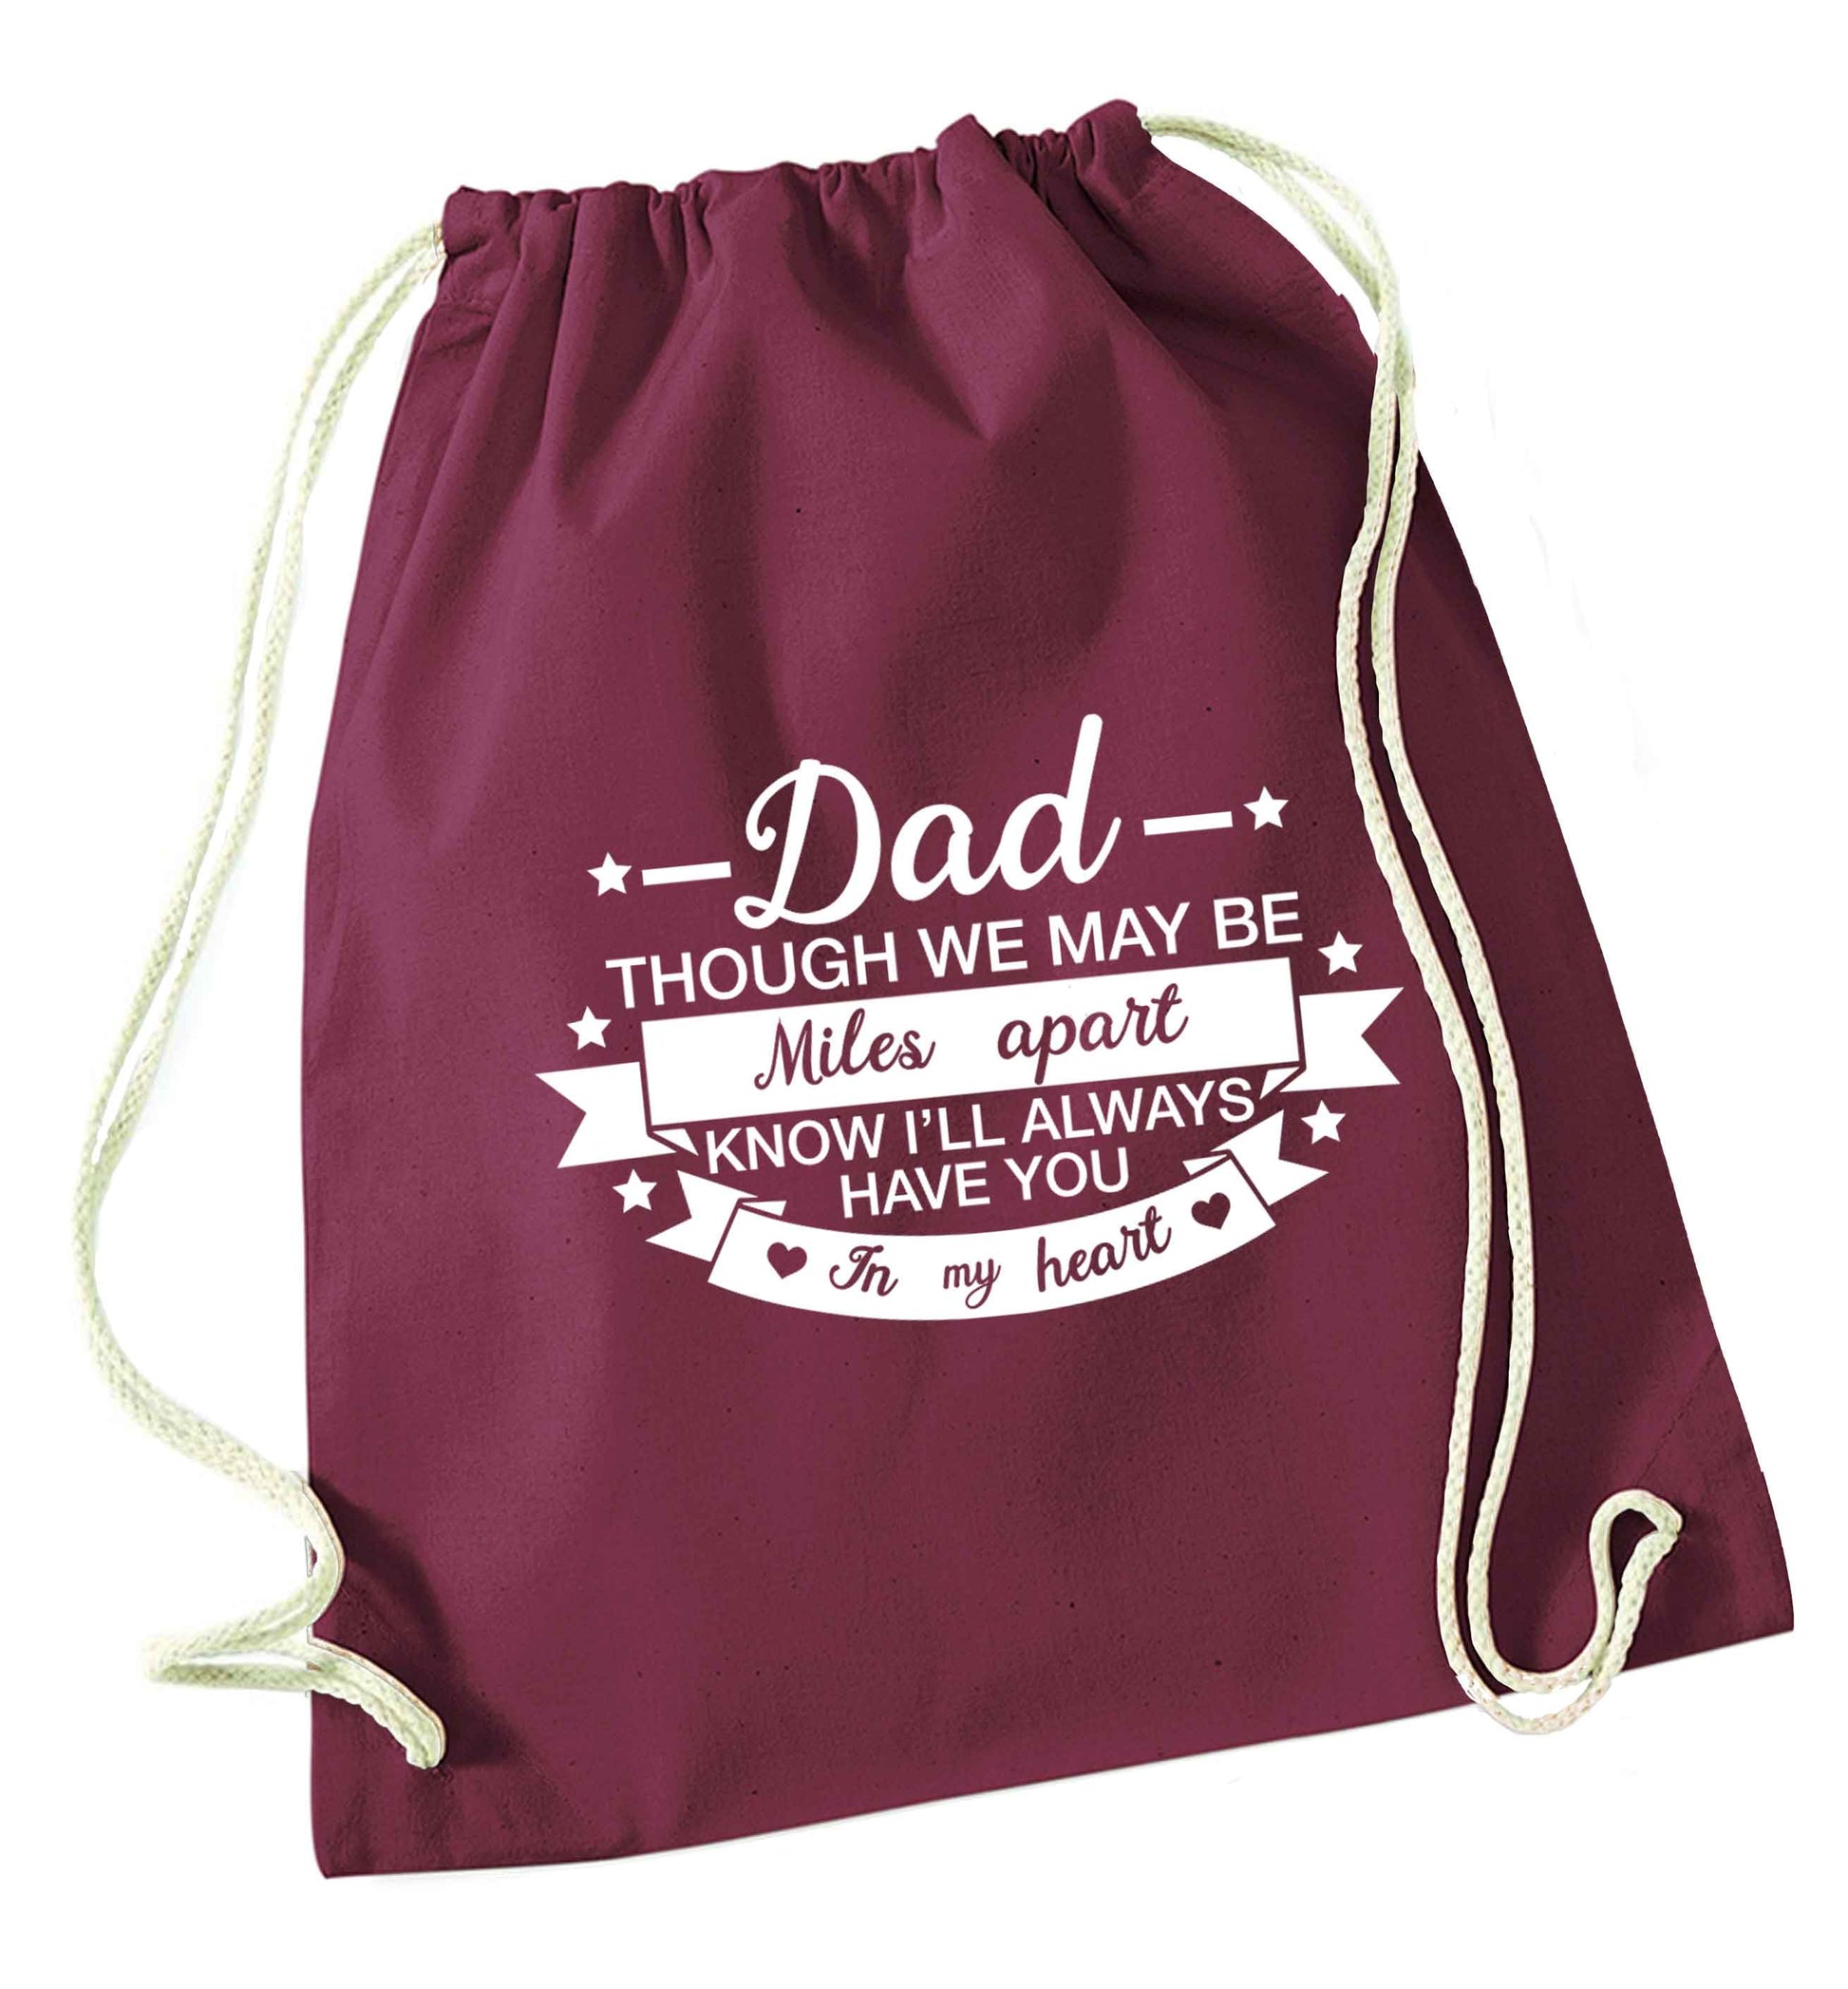 Dad though we are miles apart know I'll always have you in my heart maroon drawstring bag